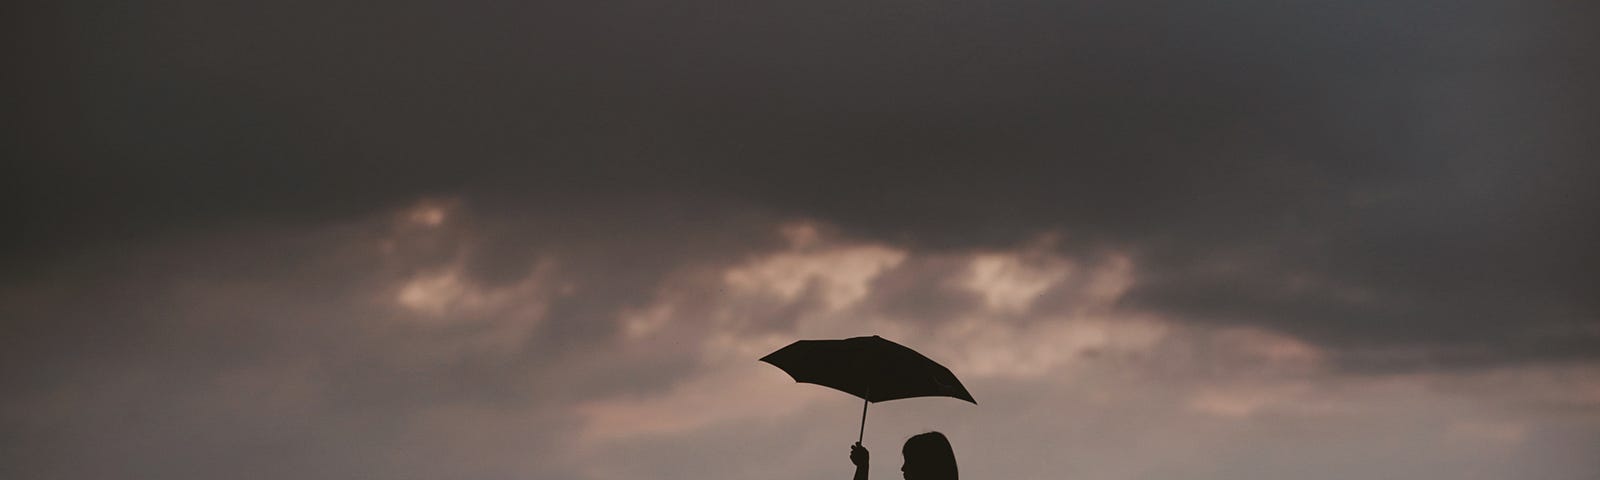 A picture of a dark stormy sky and two people sharing an umbrella.